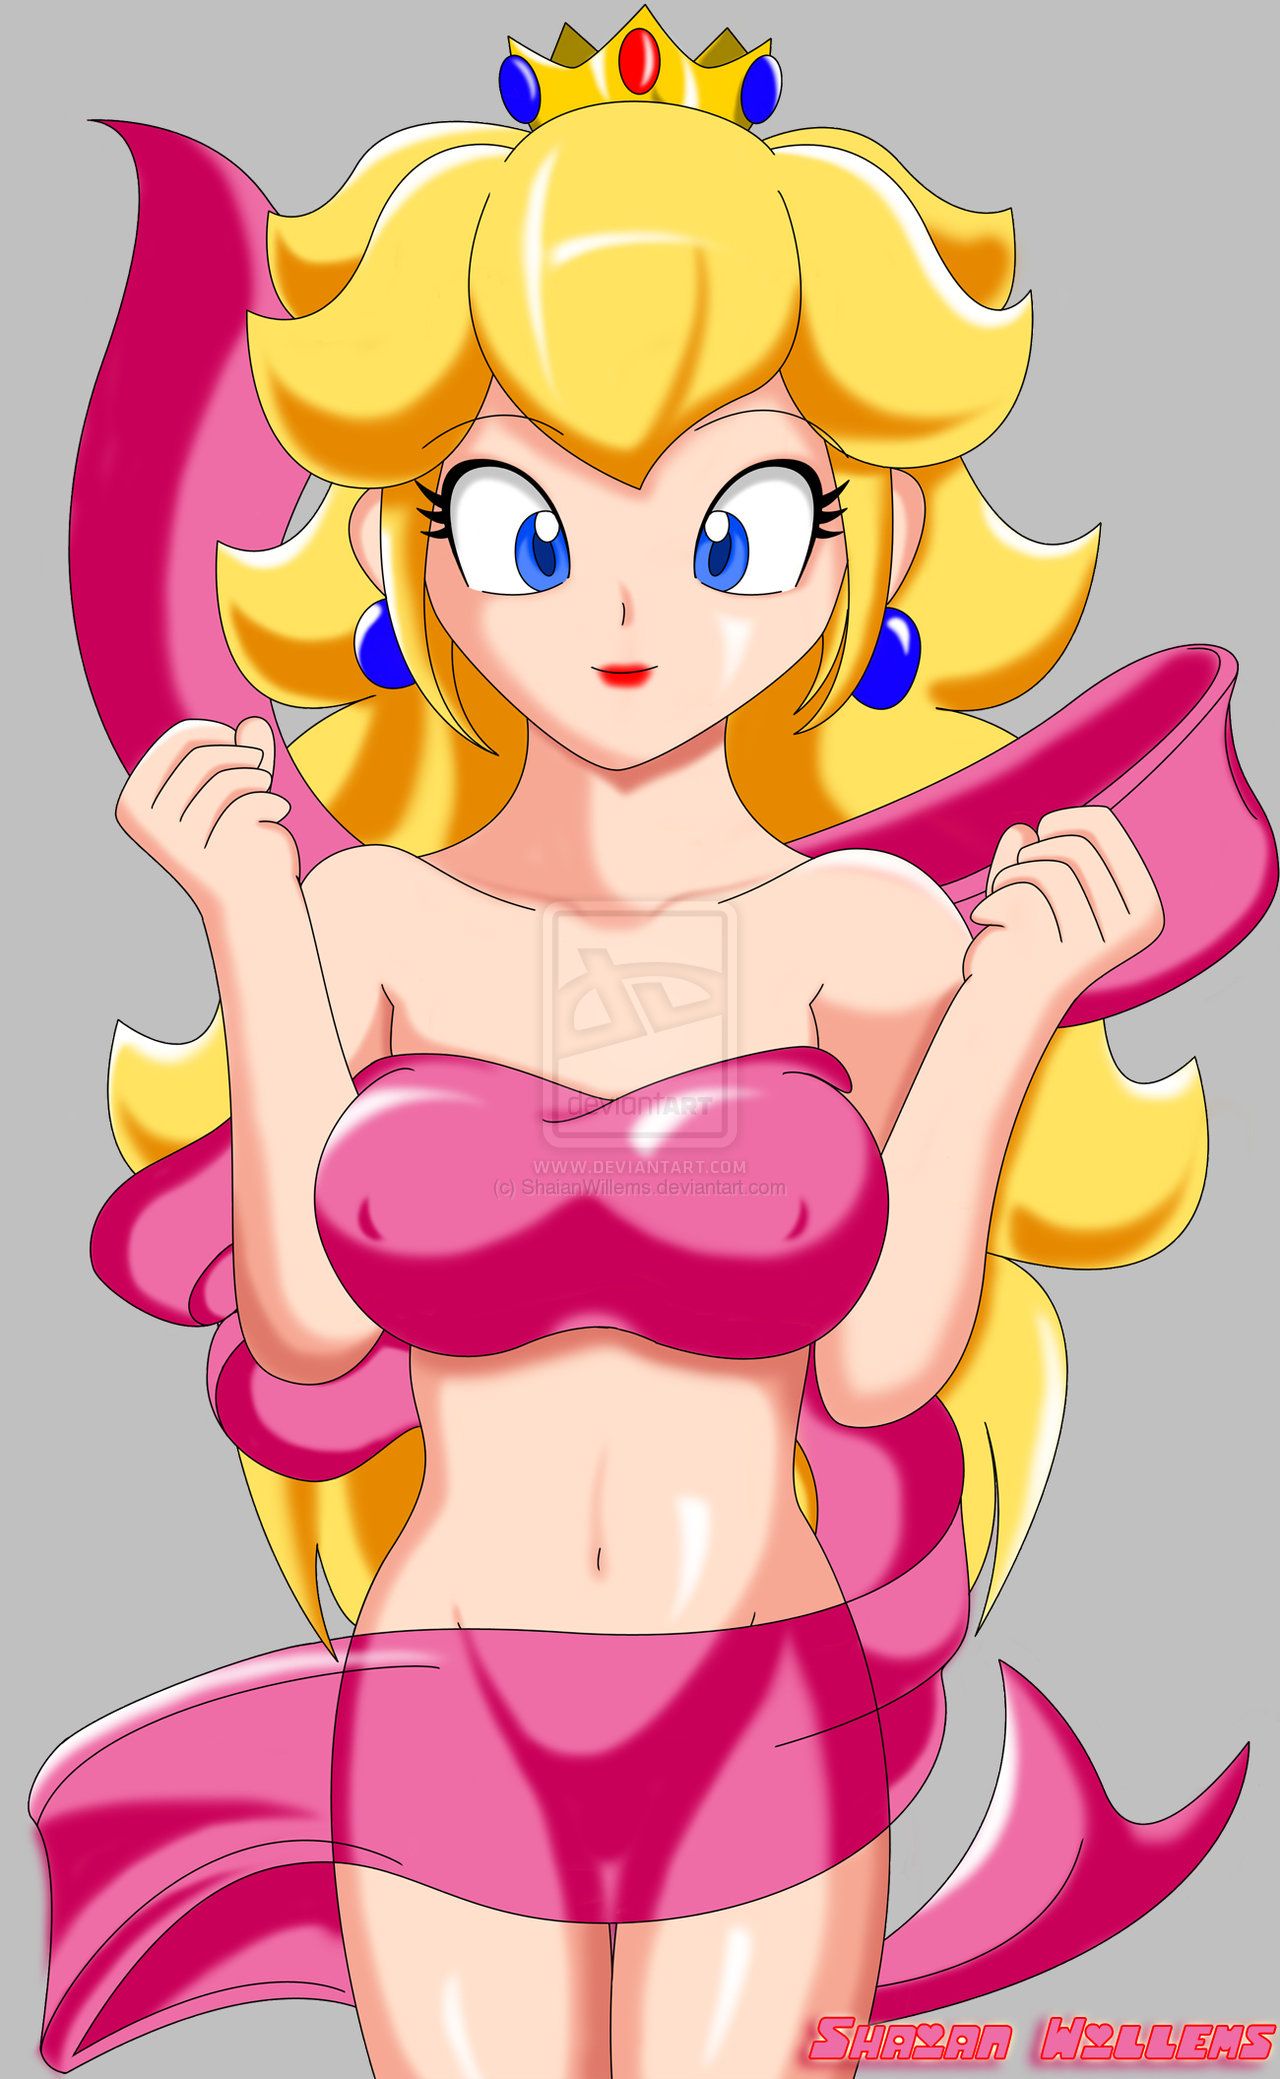 Sexy Pictures Of Princess Peach when high